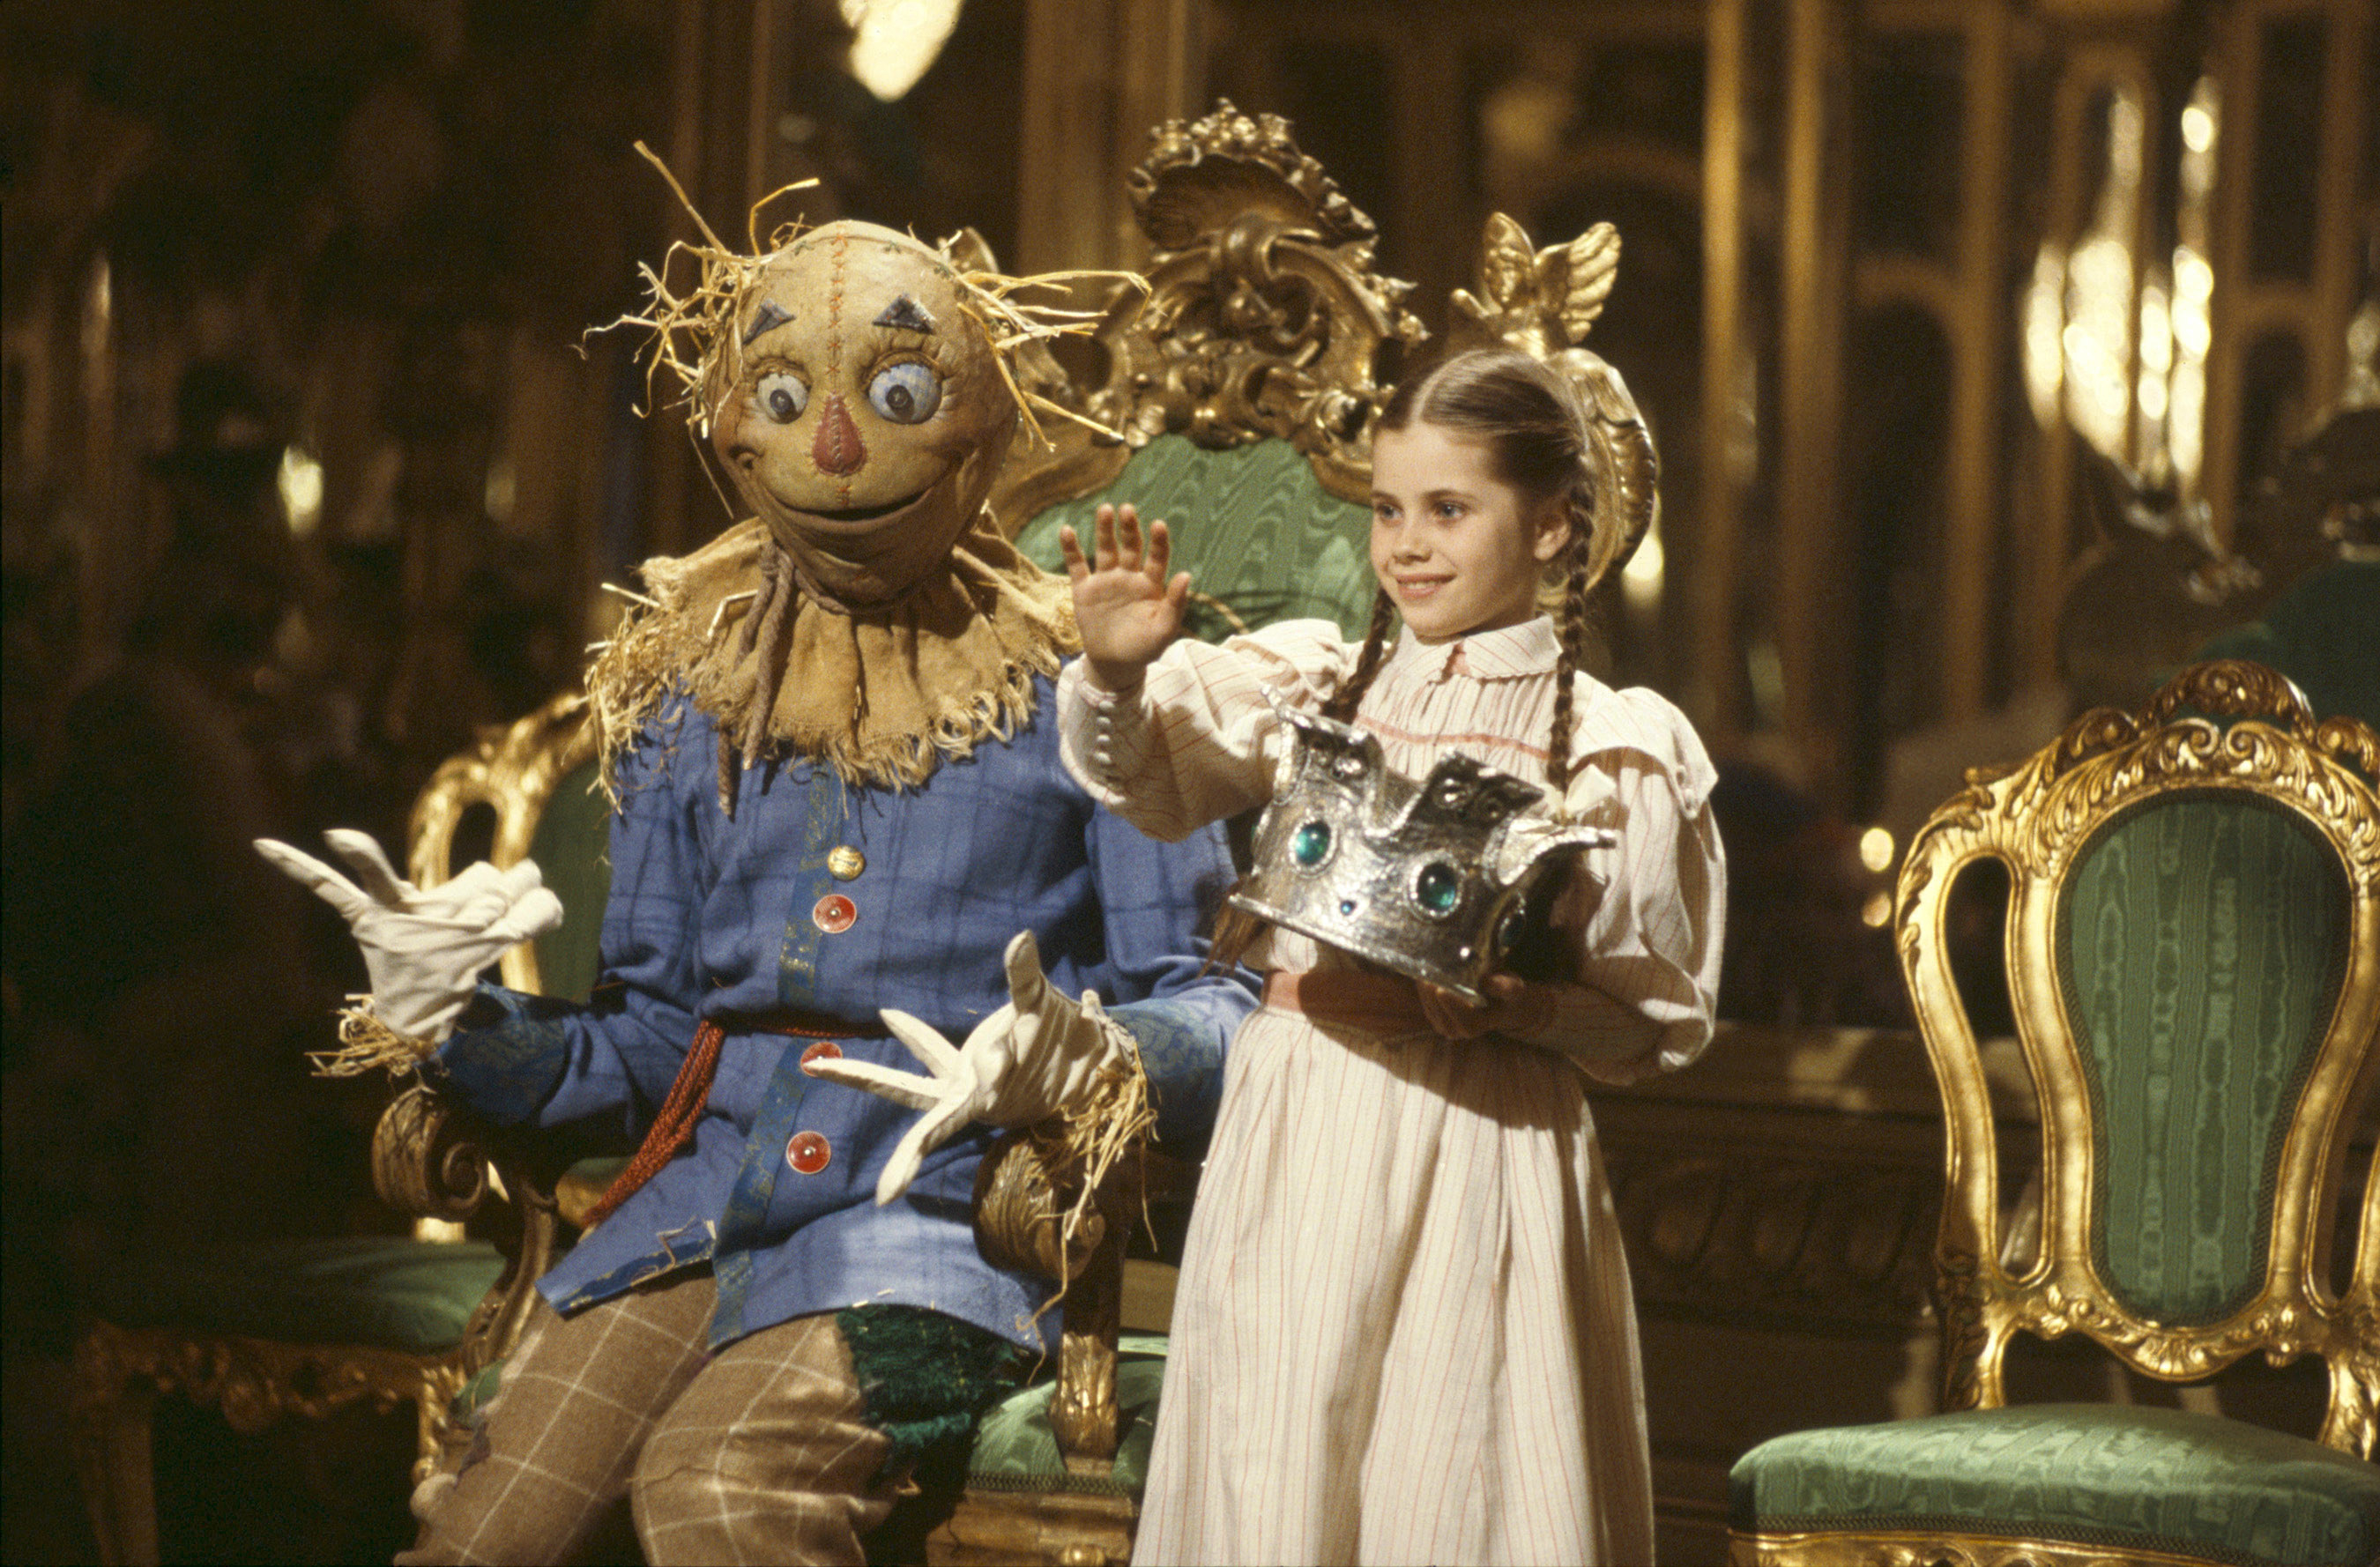 Dorothy and the scarecrow on a throne